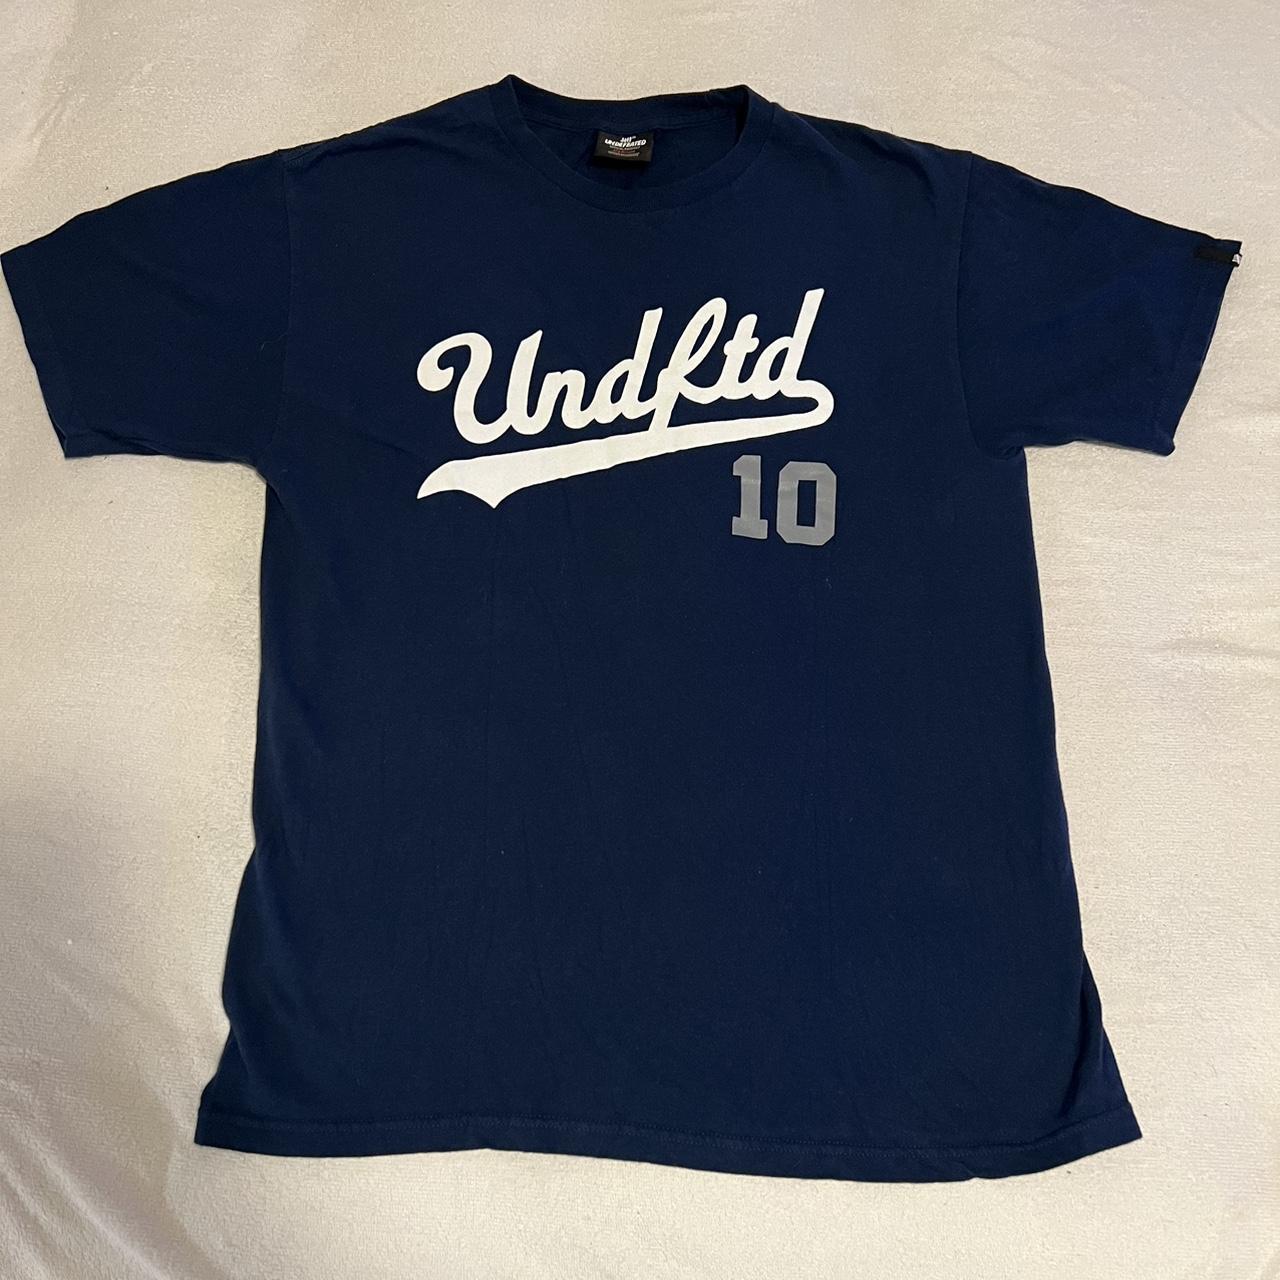 Undefeated Men's Navy and White T-shirt